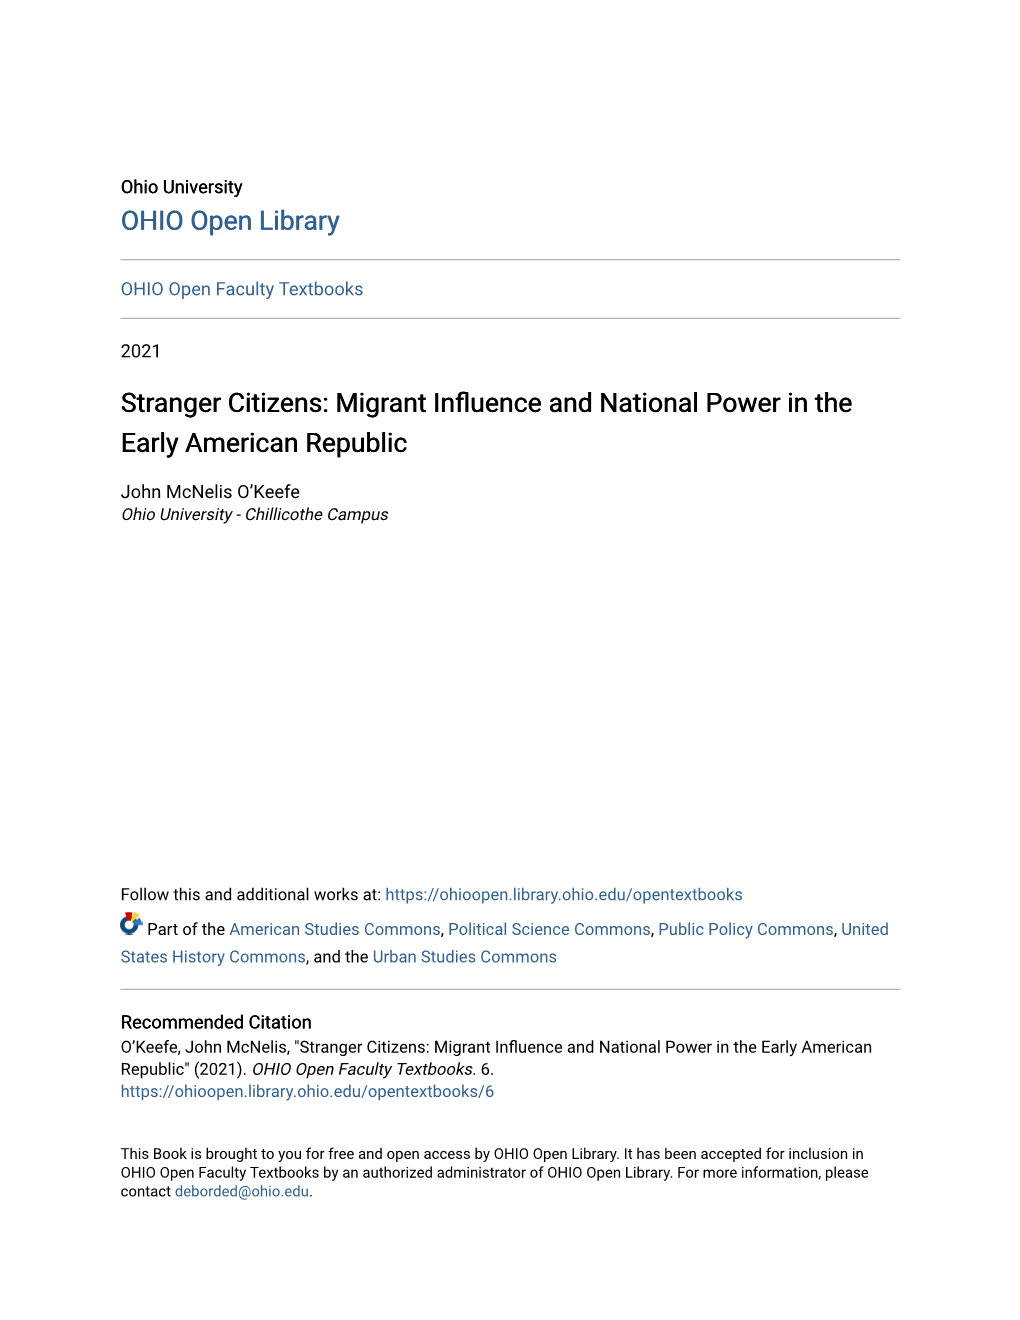 Migrant Influence and National Power in the Early American Republic" (2021)